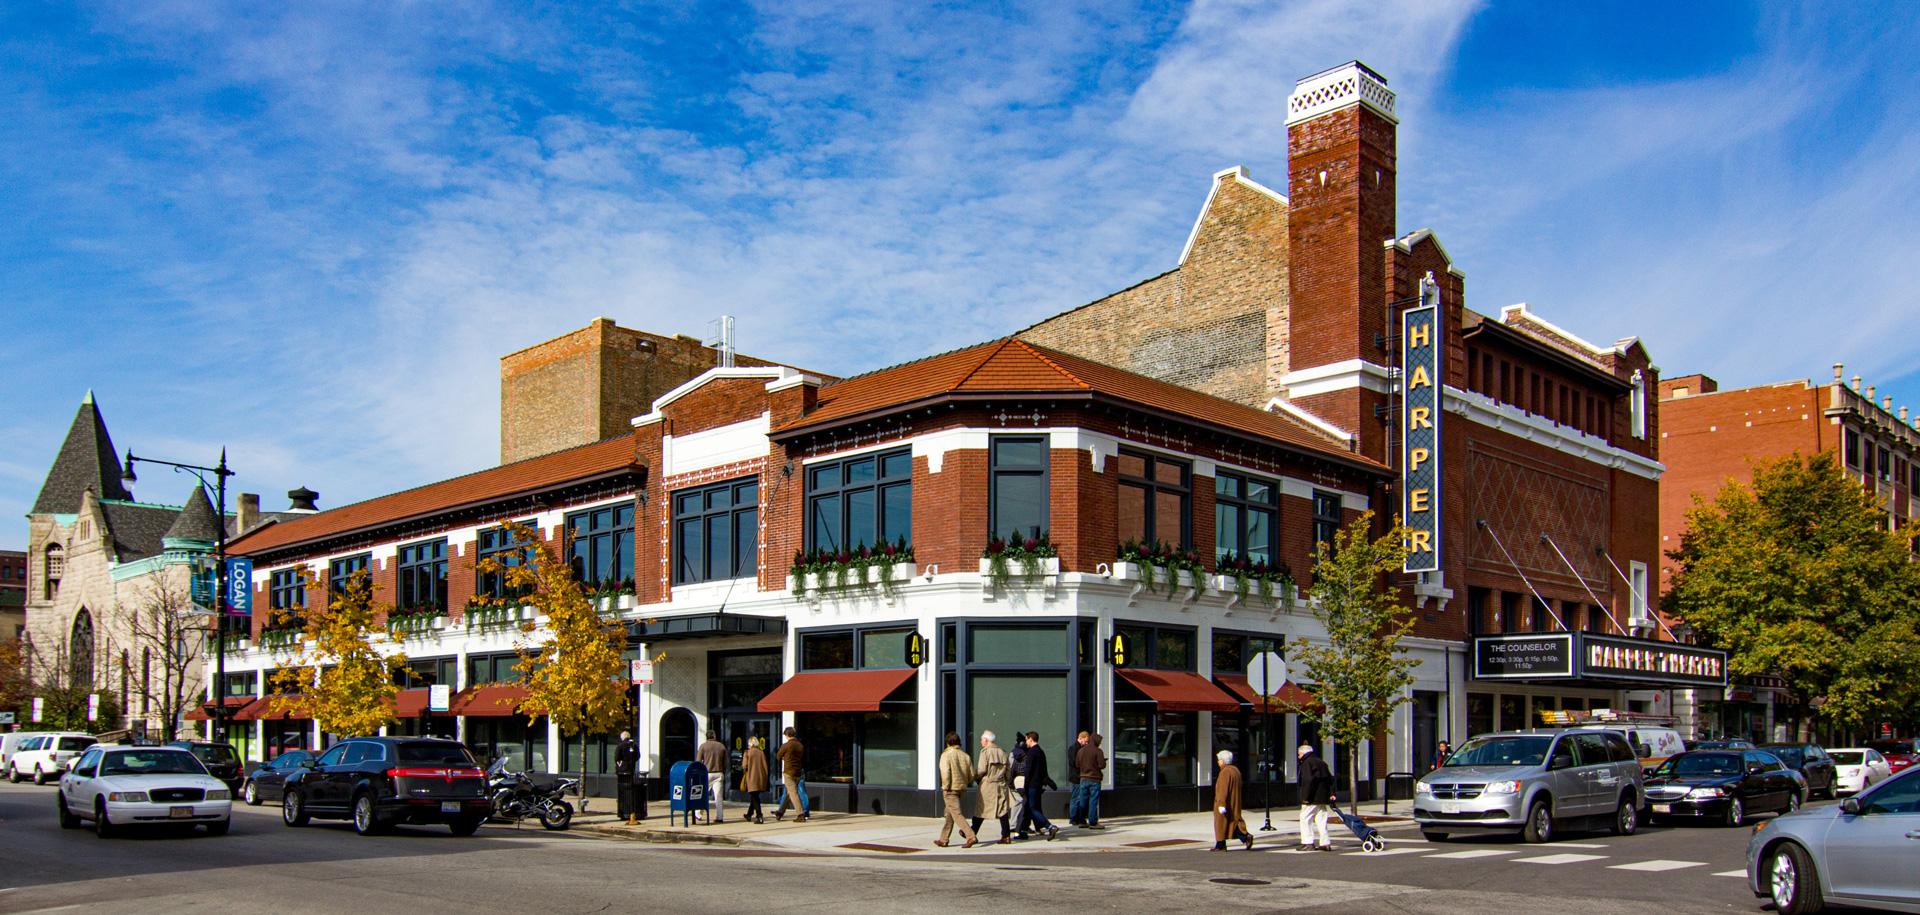 View of Harper Theatre, A10 and Five Guys Burger And Fries at 53rd and Harper Ave in Hyde Park, Chicago